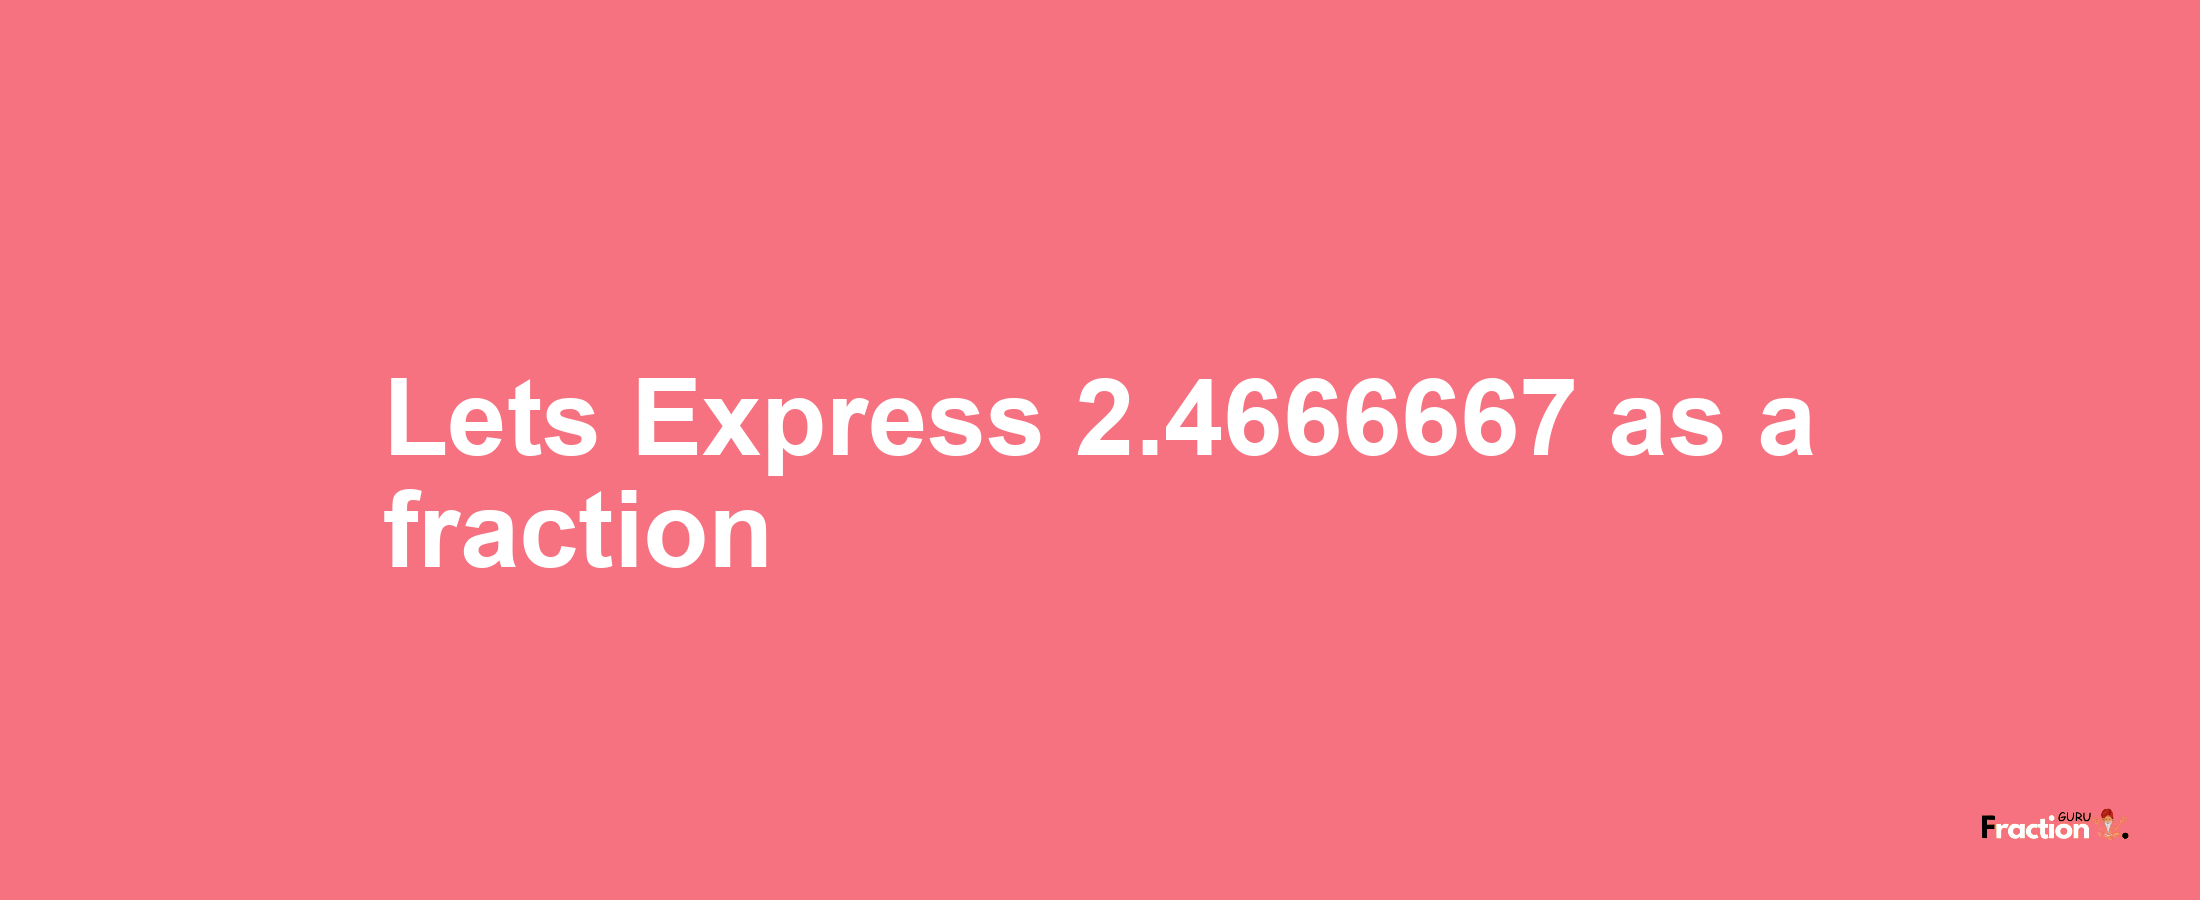 Lets Express 2.4666667 as afraction